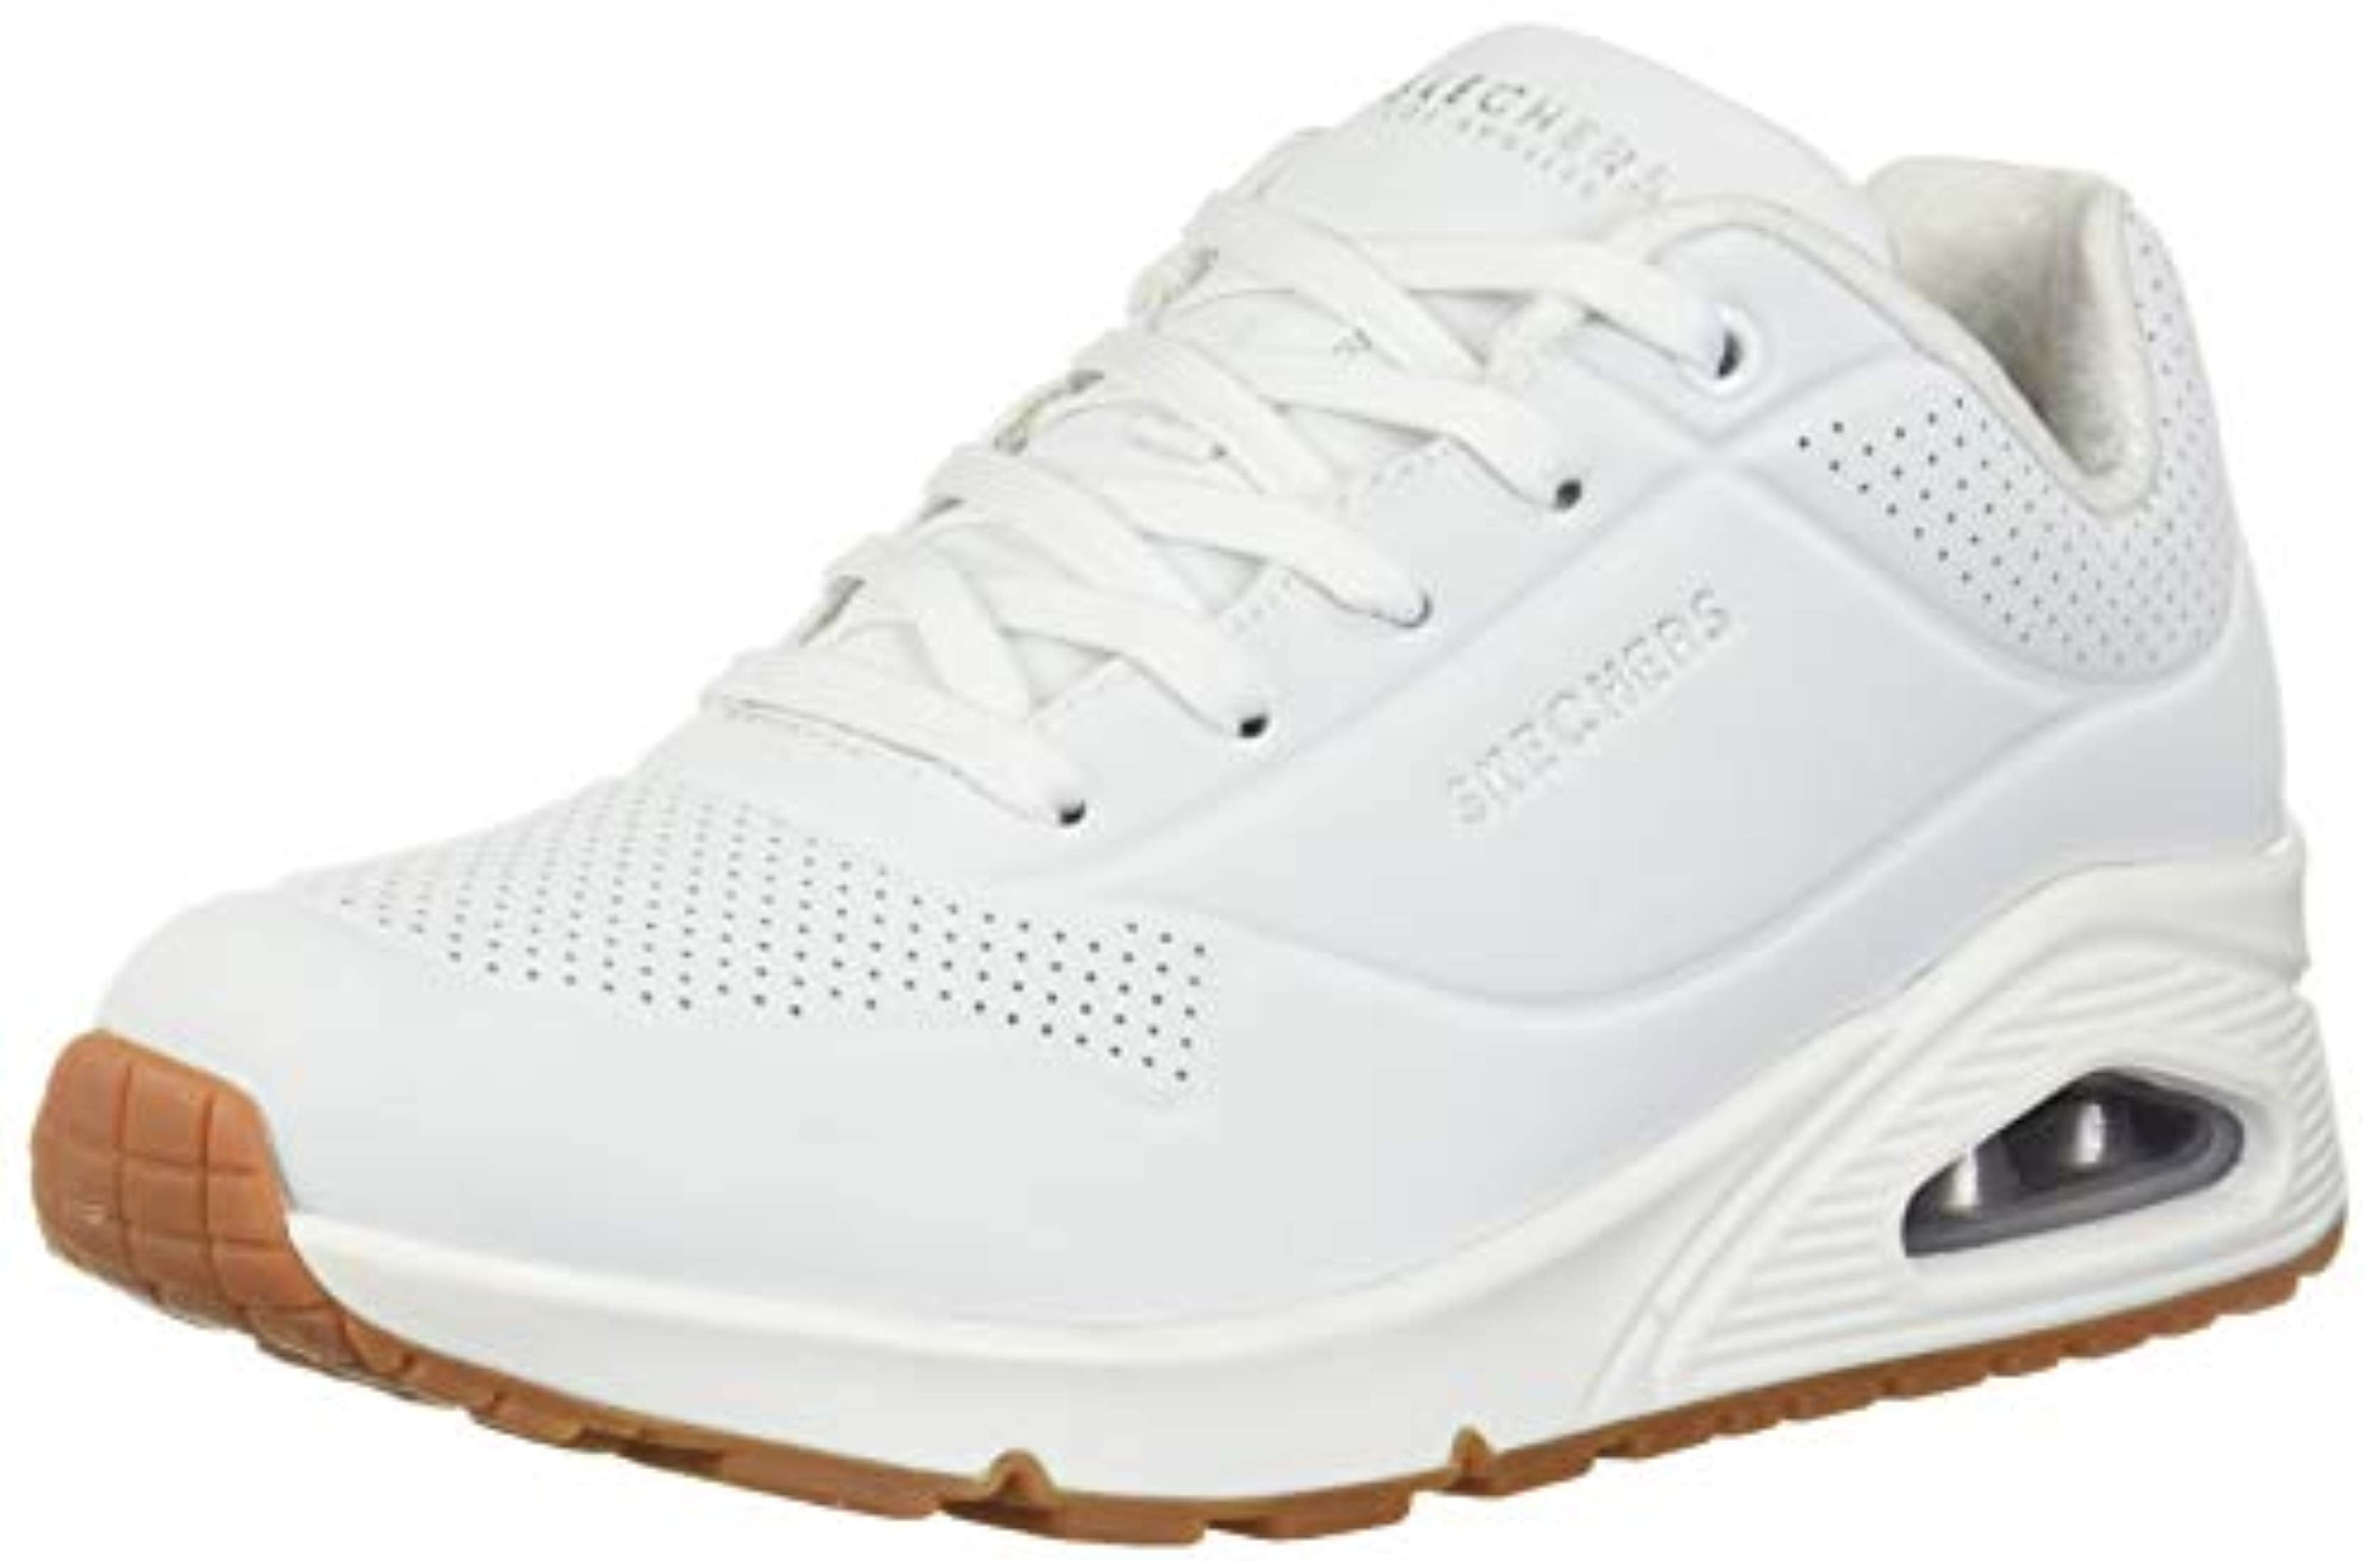 Skechers Women s UNO Stand On Air Lace Up Durabuck Fashion Sneaker 